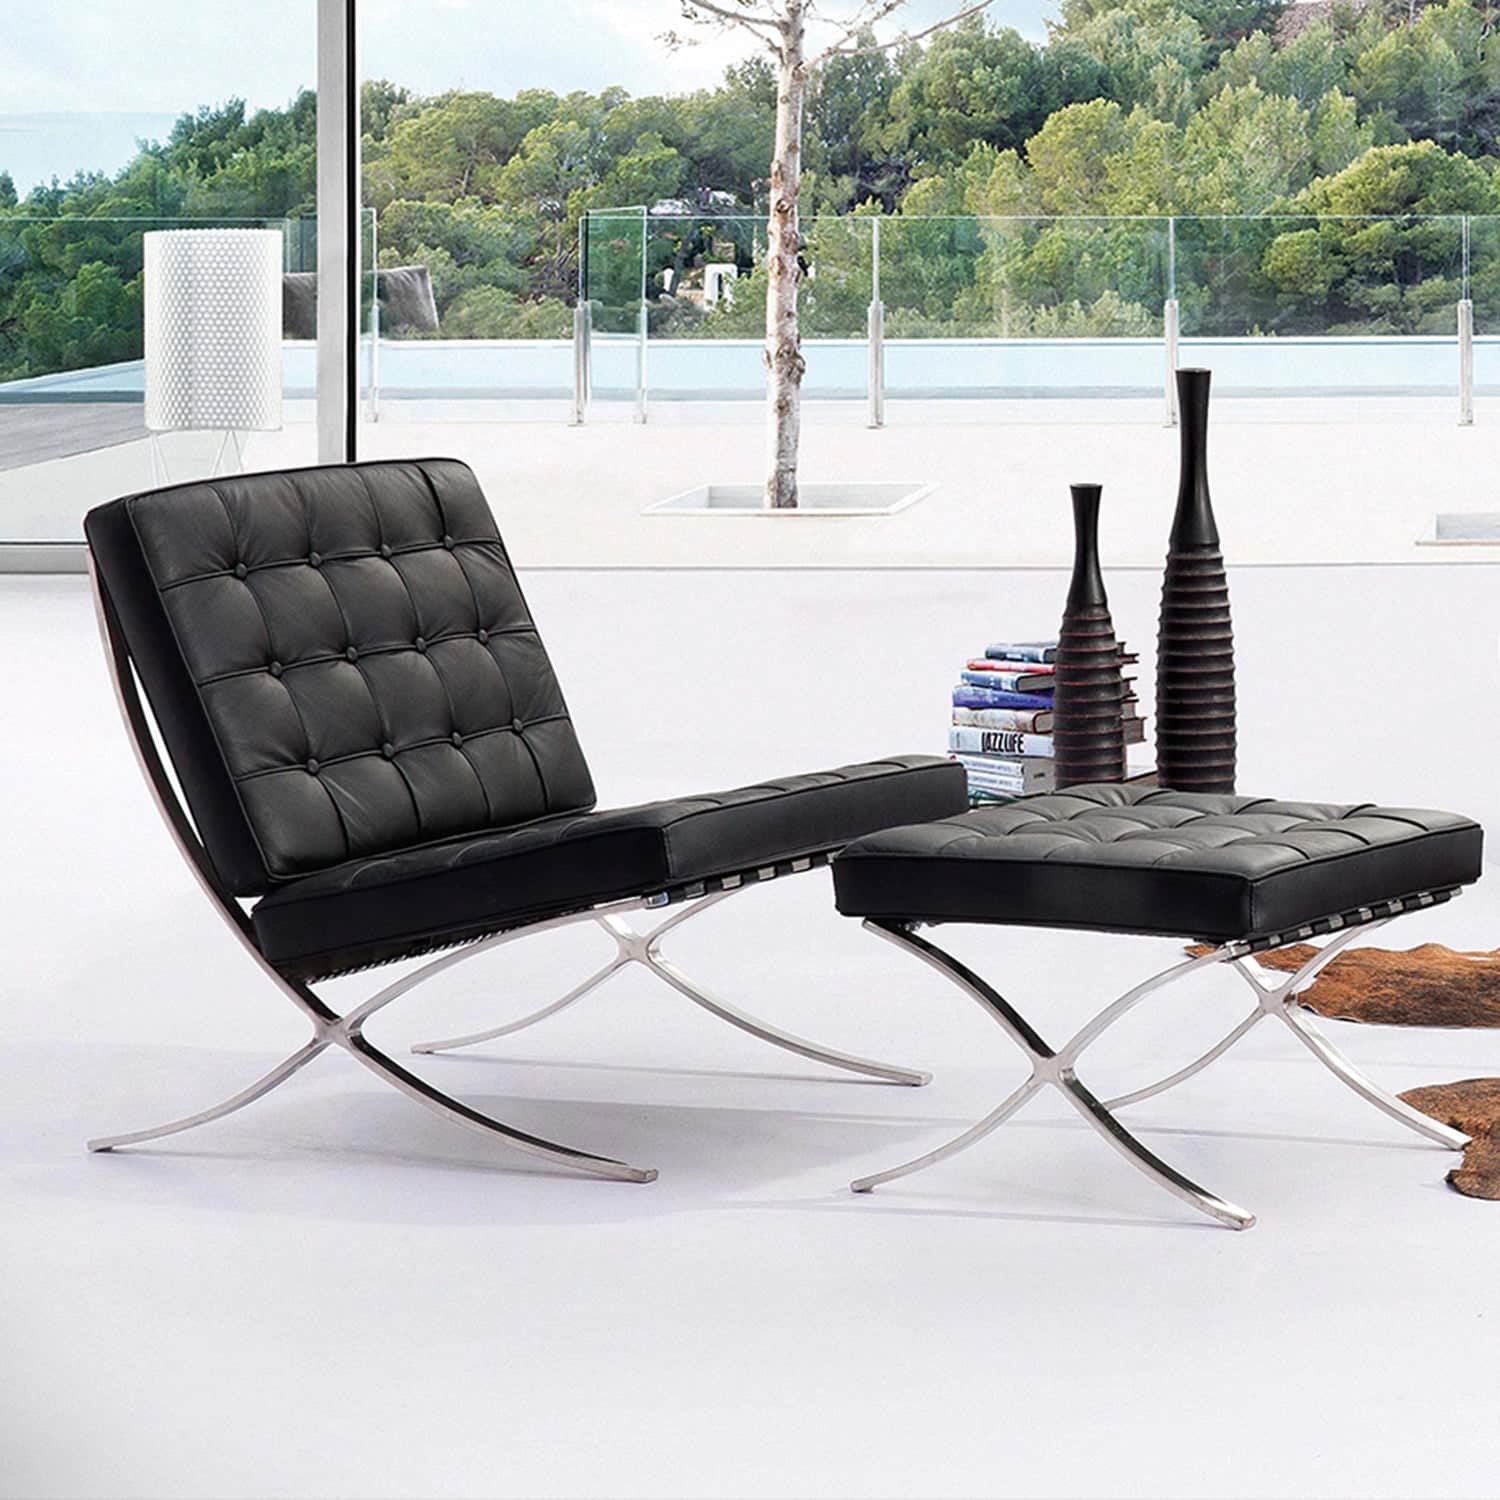 Elegant Barcelona Chair Replica with Stool, dressed in genuine leather upholstery and seated on a mirror-like polished stainless-steel base, embodying modern luxury and sophisticated design.